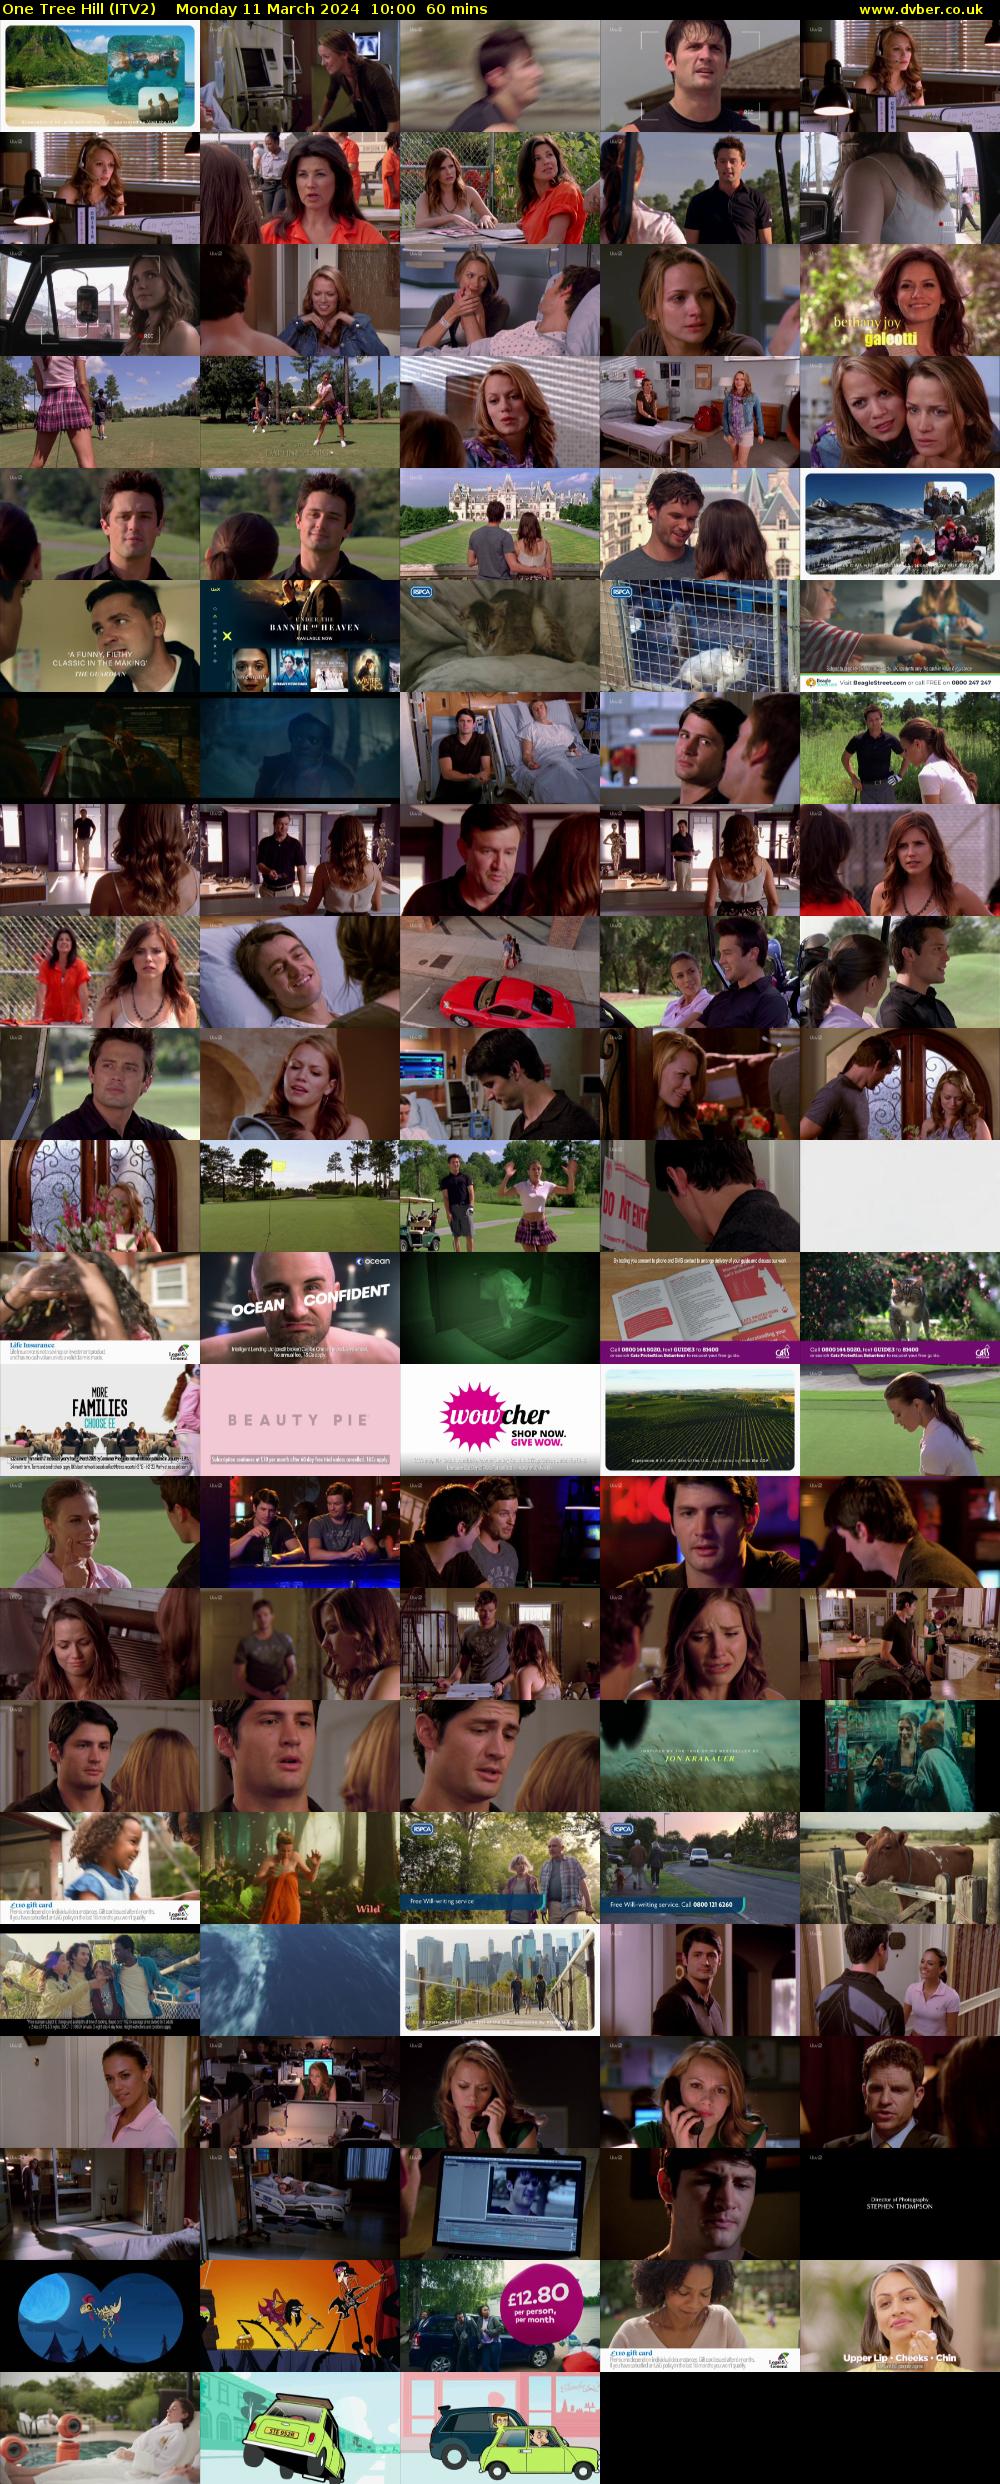 One Tree Hill (ITV2) Monday 11 March 2024 10:00 - 11:00